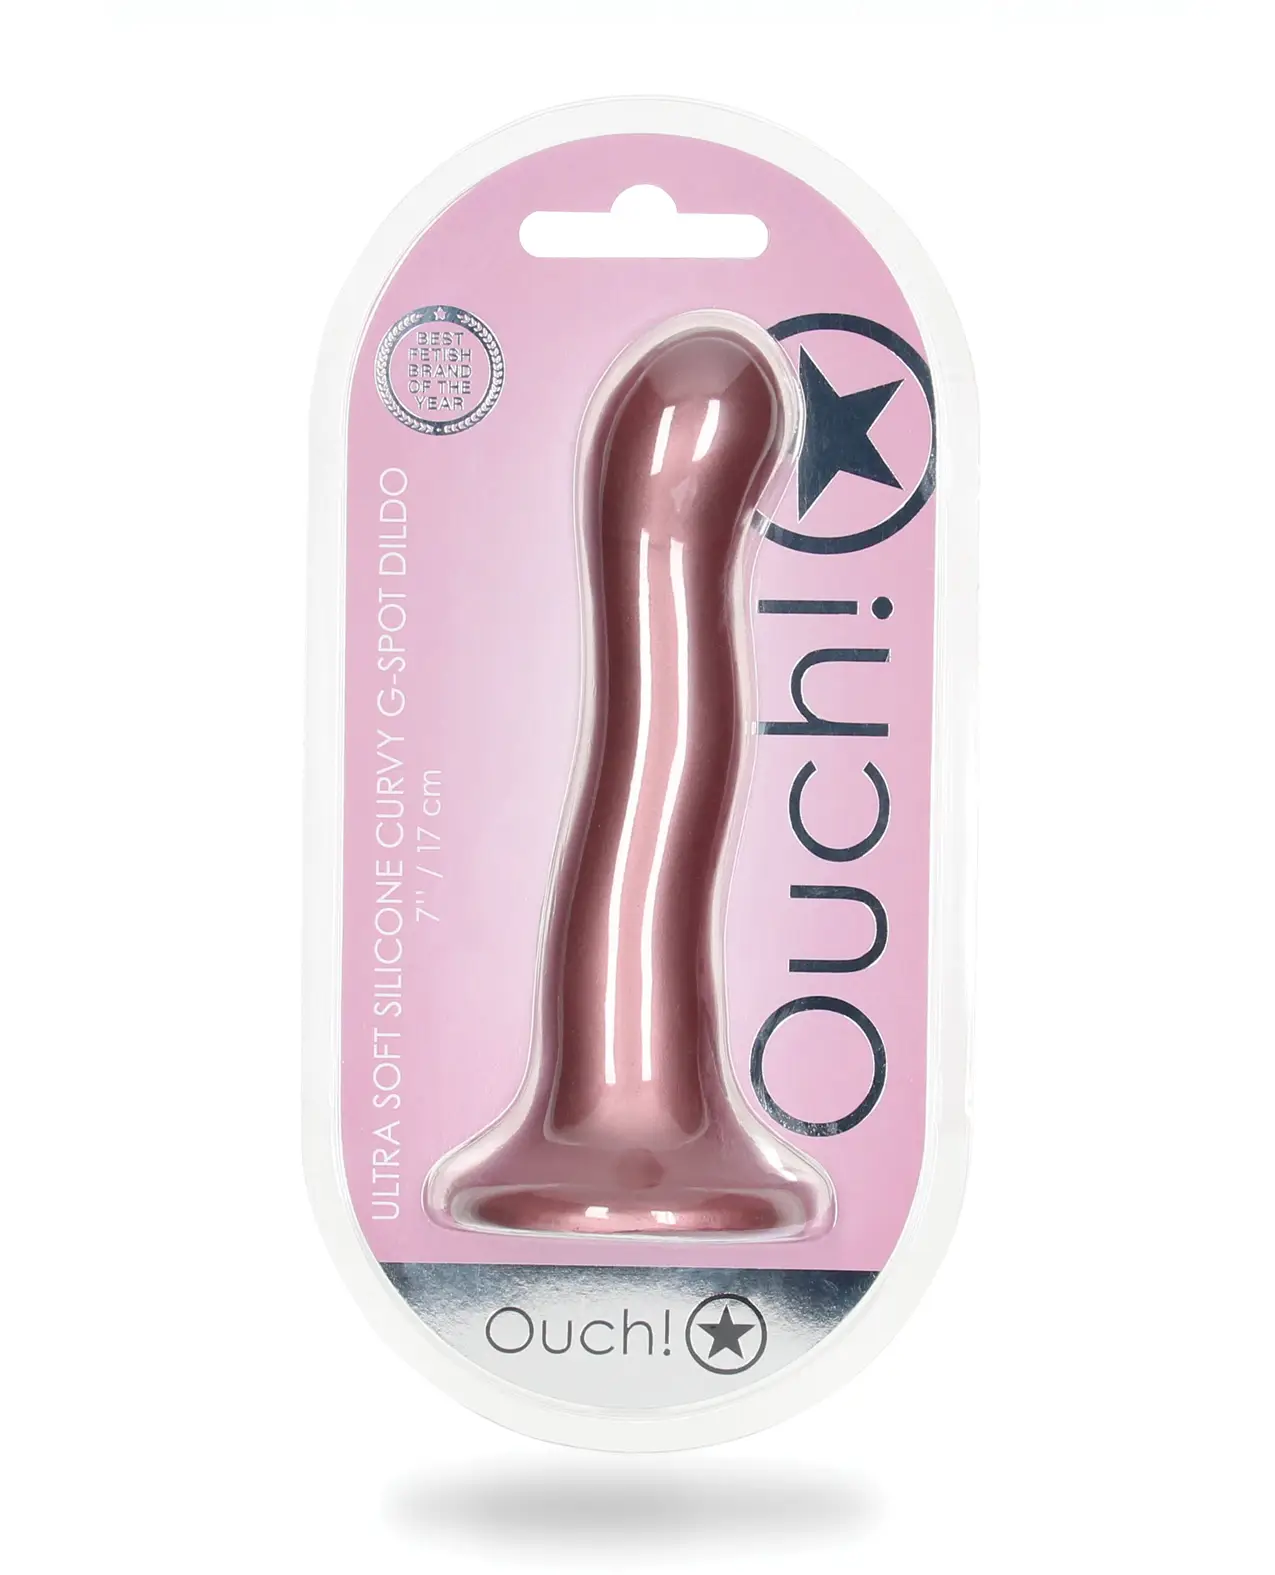 Curvy G-spot Dildo in Rose Gold in a pink clamshell package